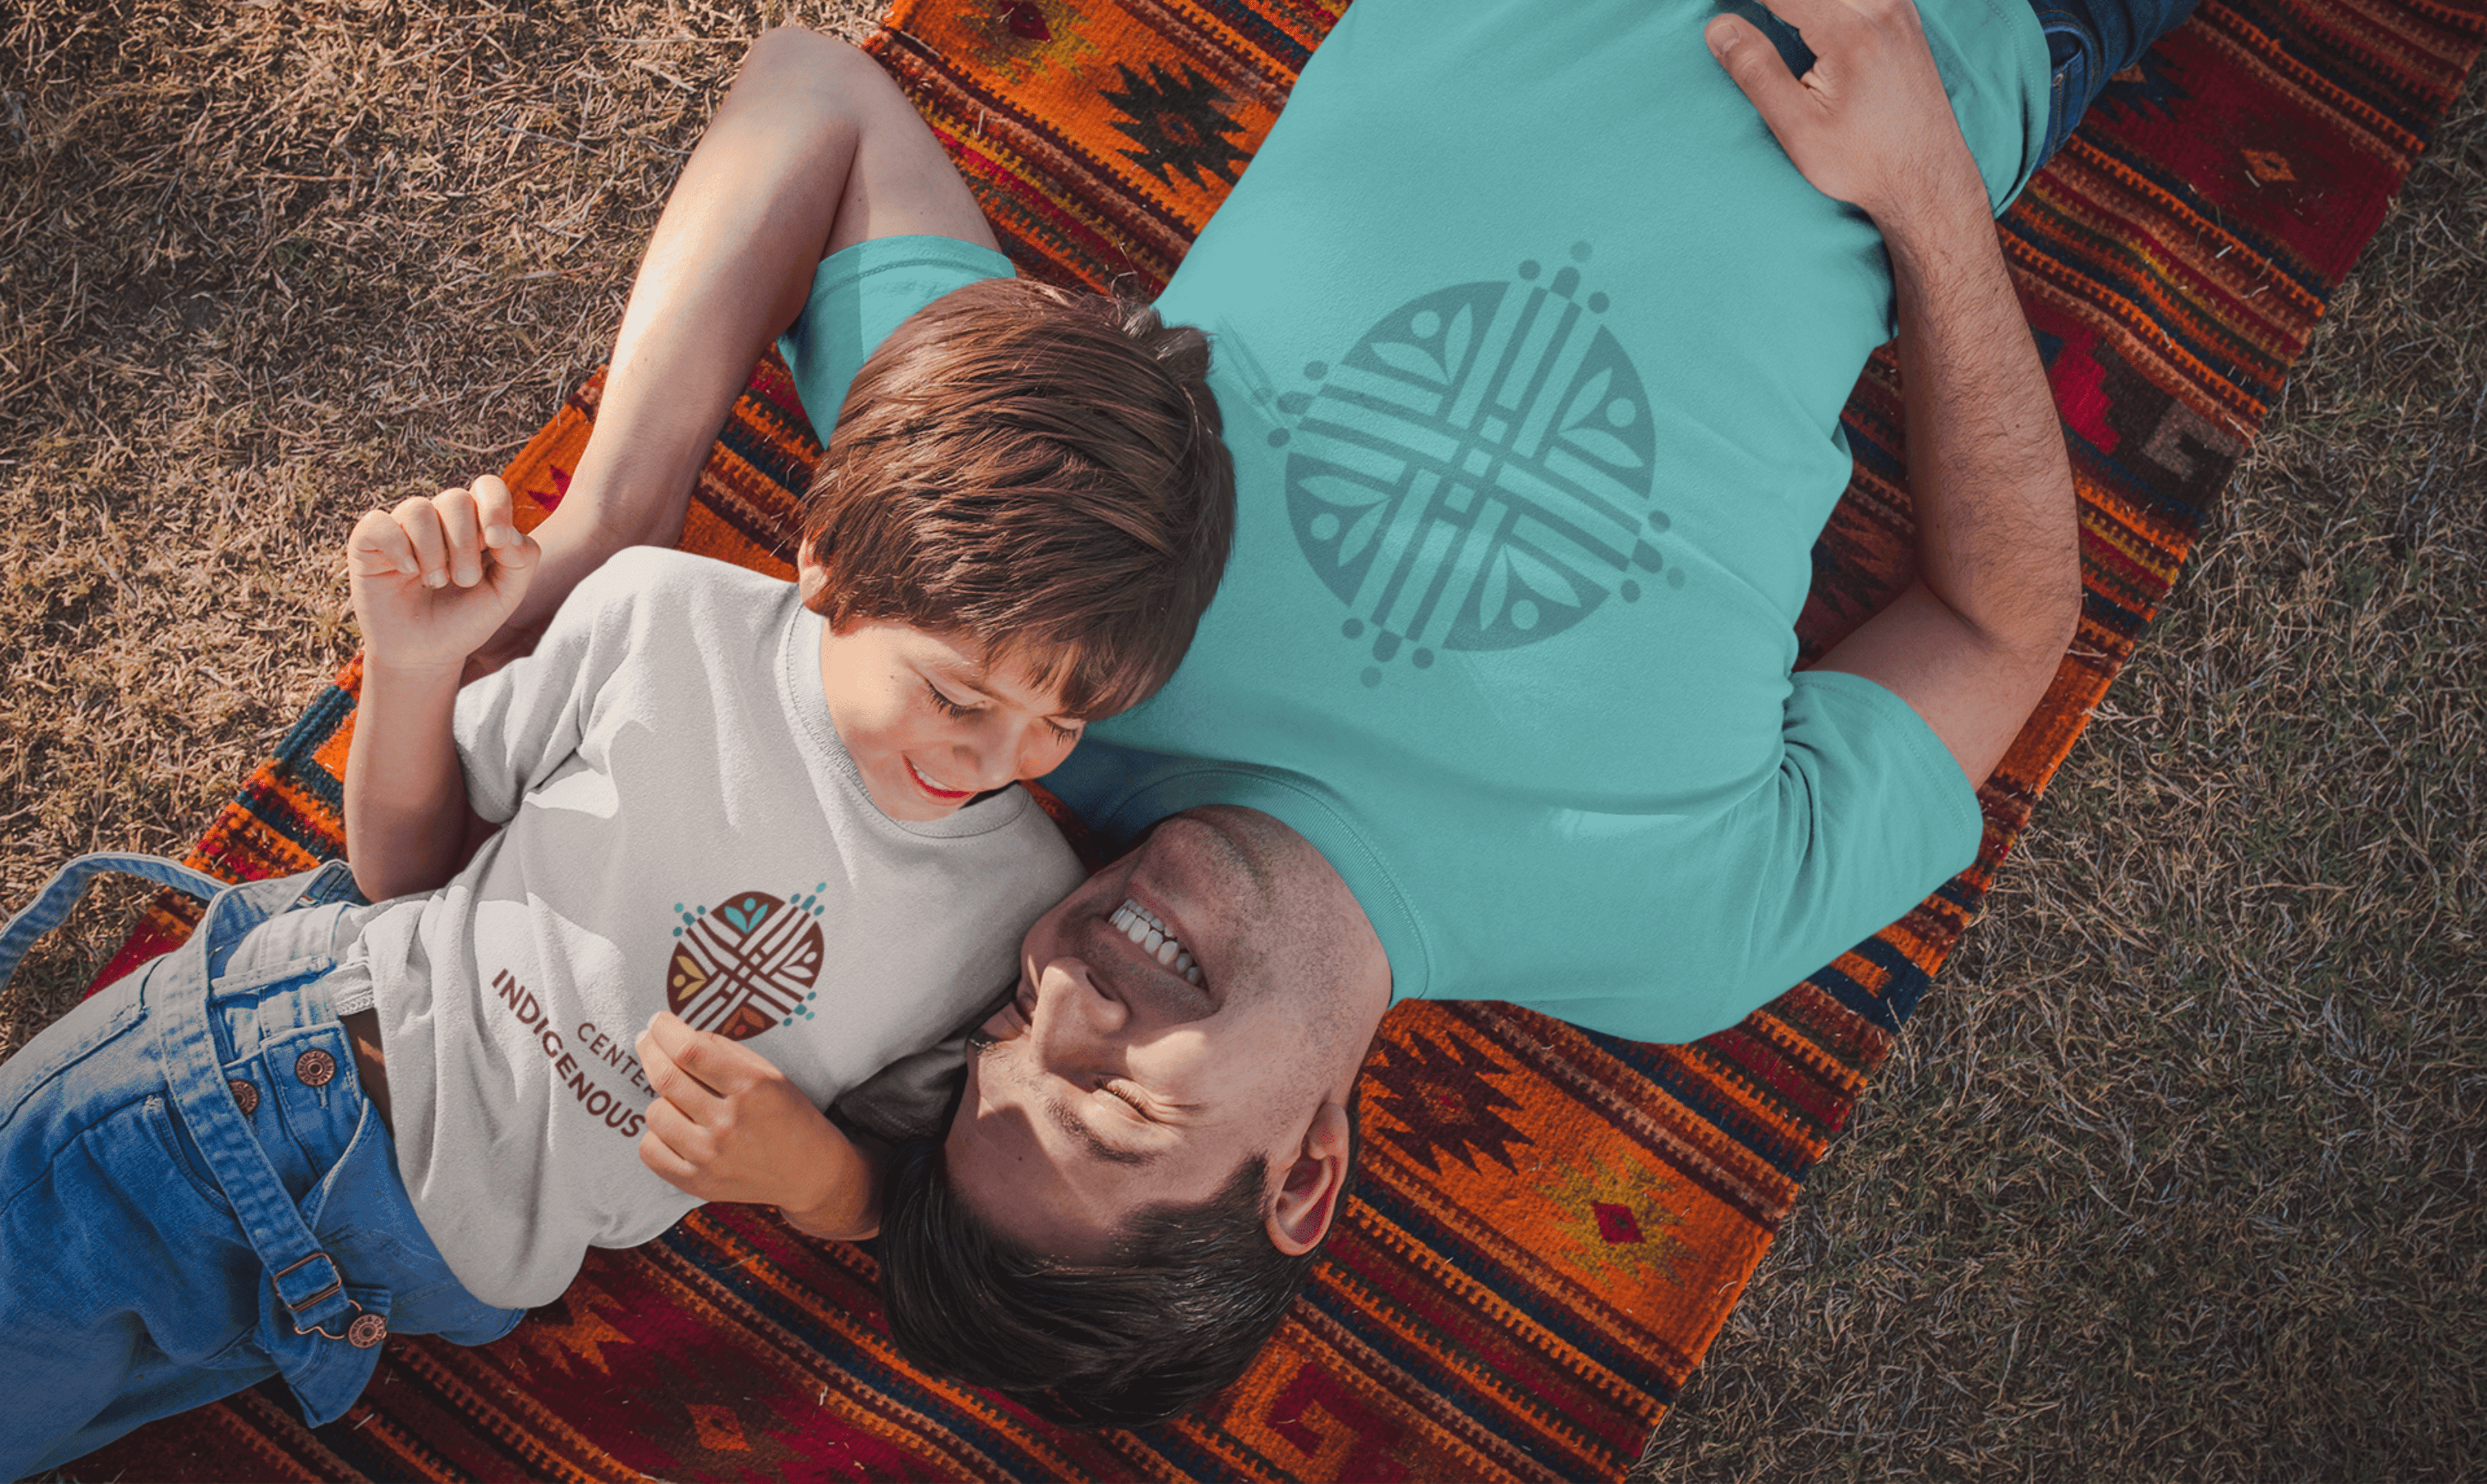 A father and son lay shoulder to shoulder on a blanket on grass. The man's t-shirt has a large logo of the Centre for Indigenous Health. The little boy also has a full colour version of the logo on his white t-shirt. They are smiling and laughing.